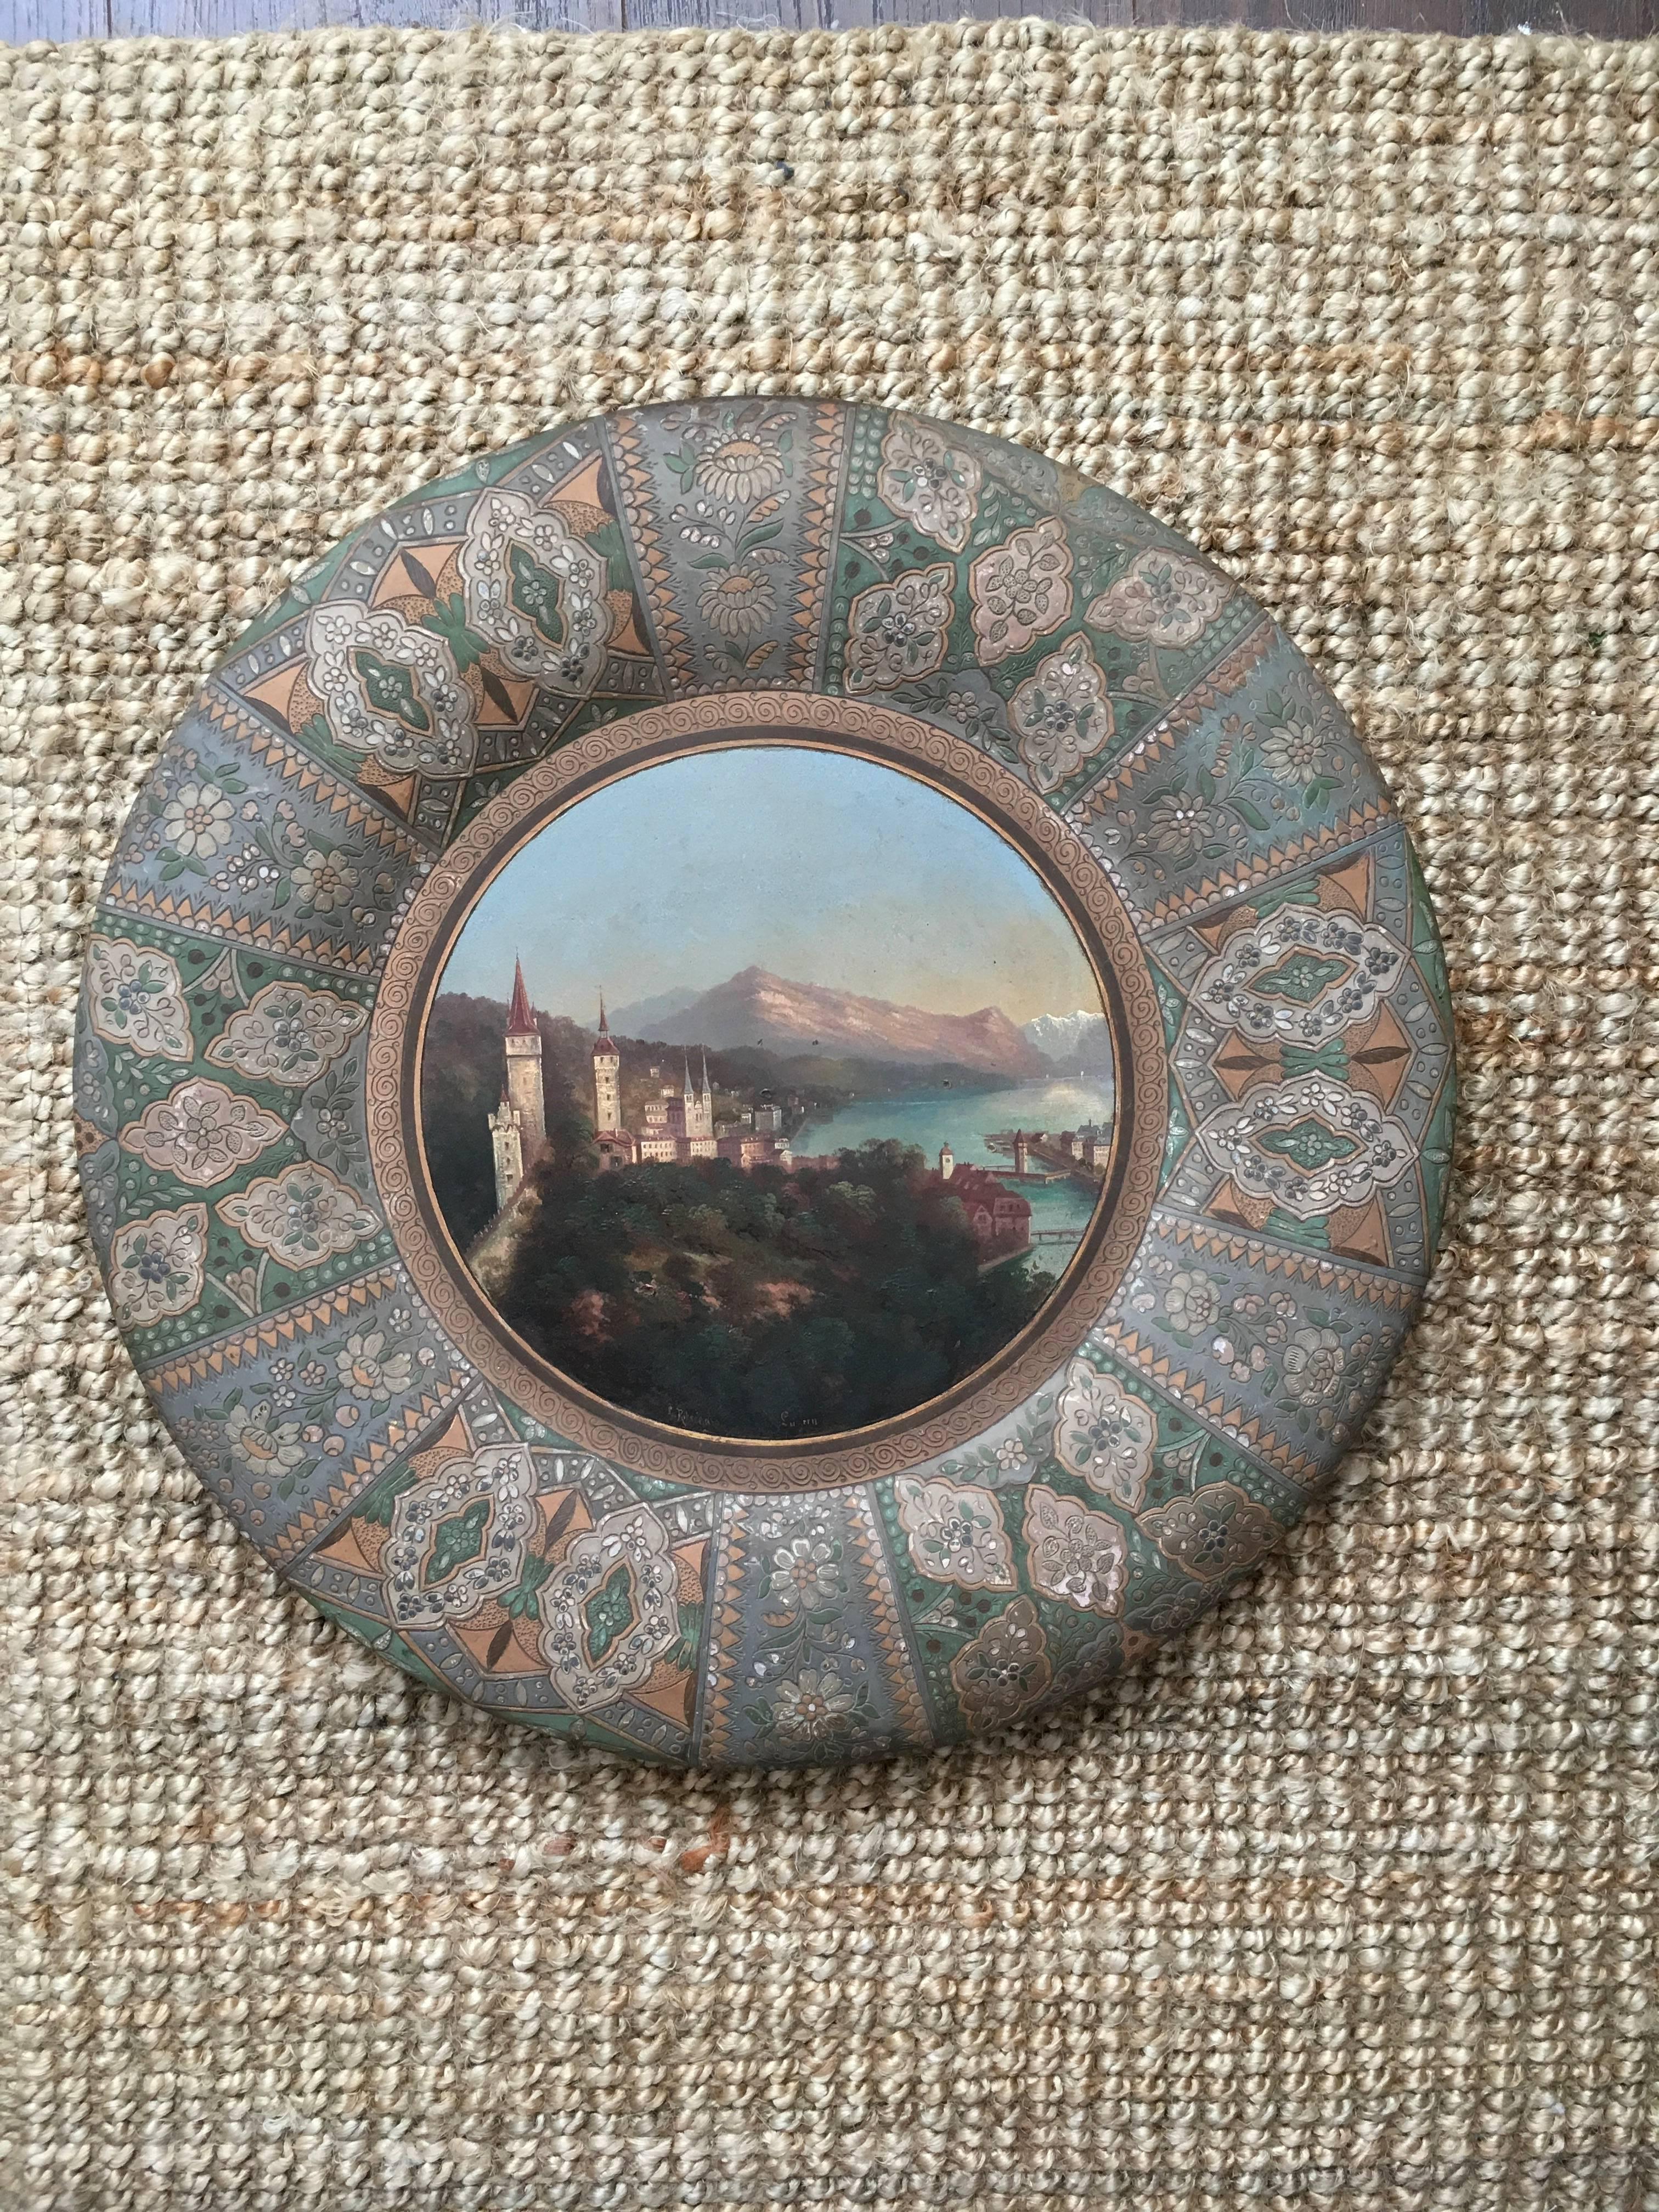 Exceptional and rare large 50 cm antique Thoune Majolika painted plaque with oil painted lake scene, dating from the 19th century. The rounded earthenware plaque has a raised rounded rim exceptionally well decorated in low relief with patterned and